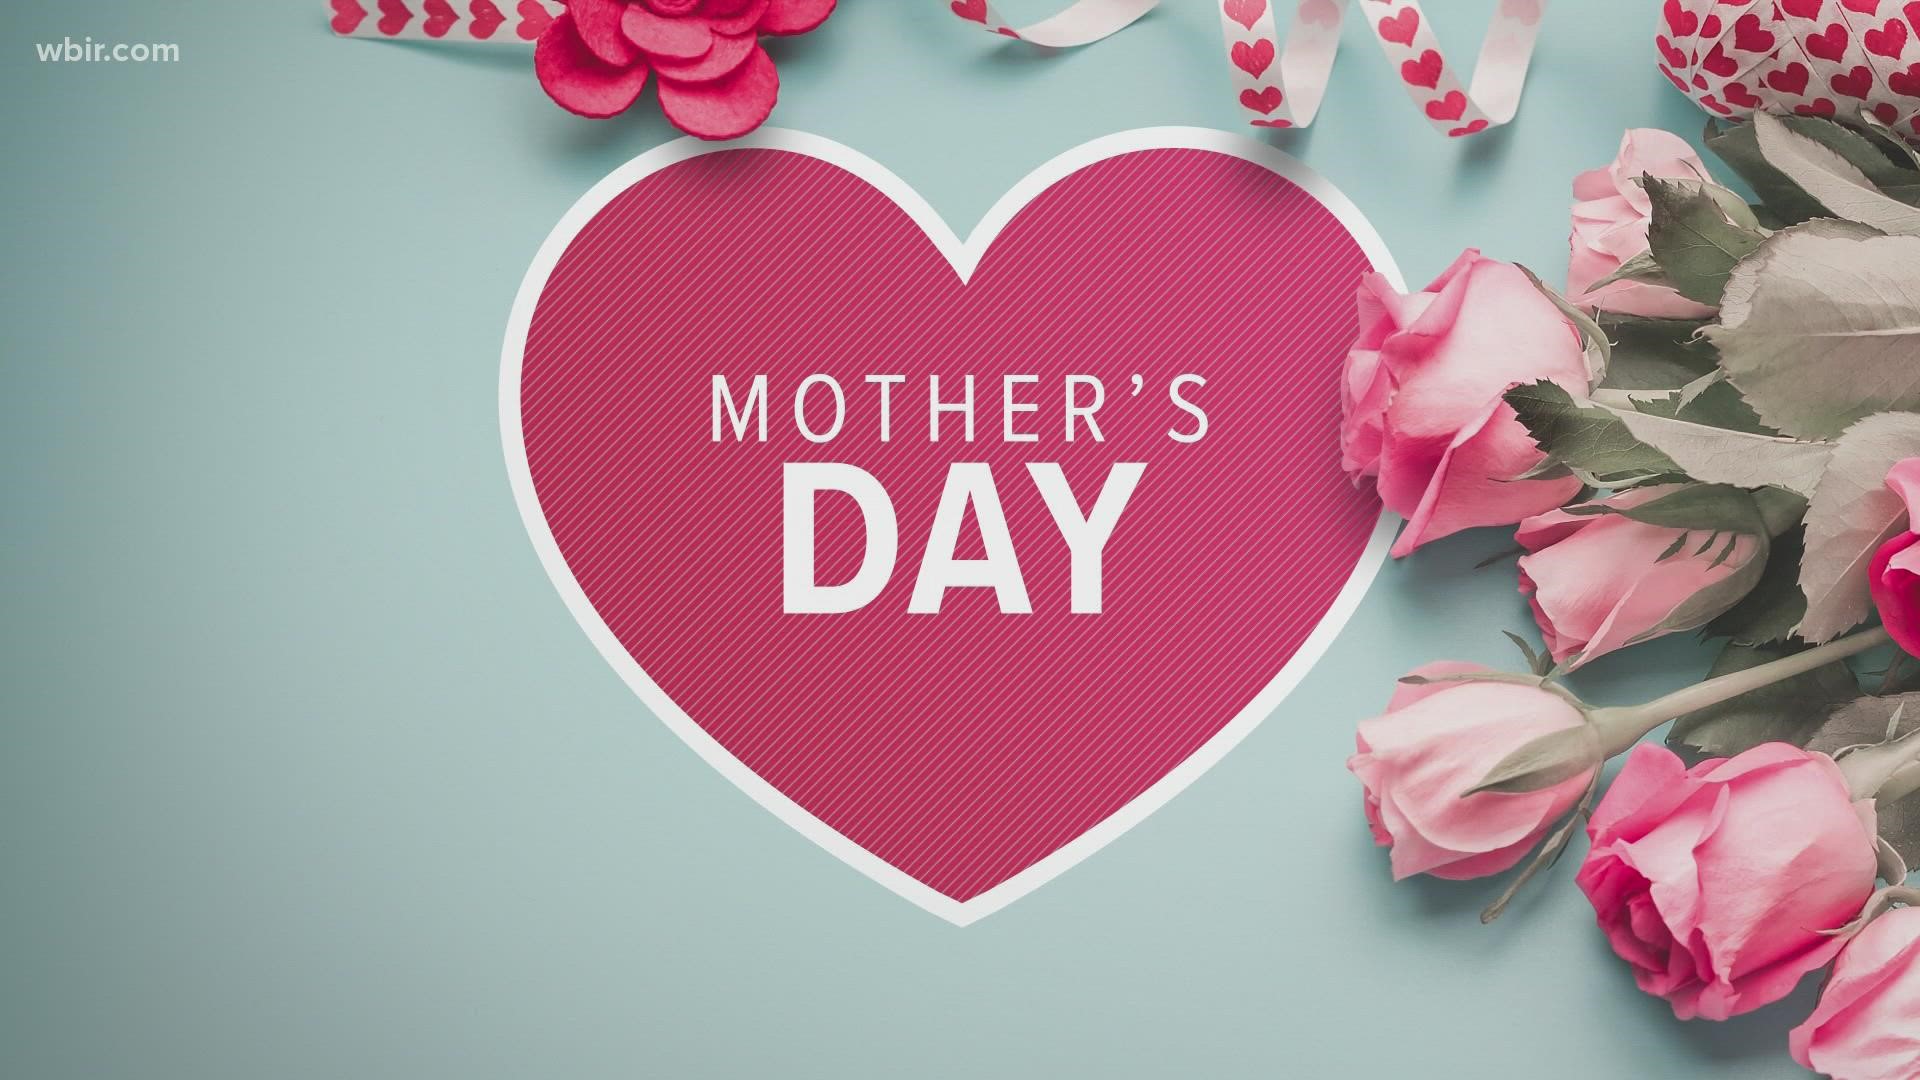 Everyone at WBIR wishes you and your family a happy Mother's Day!